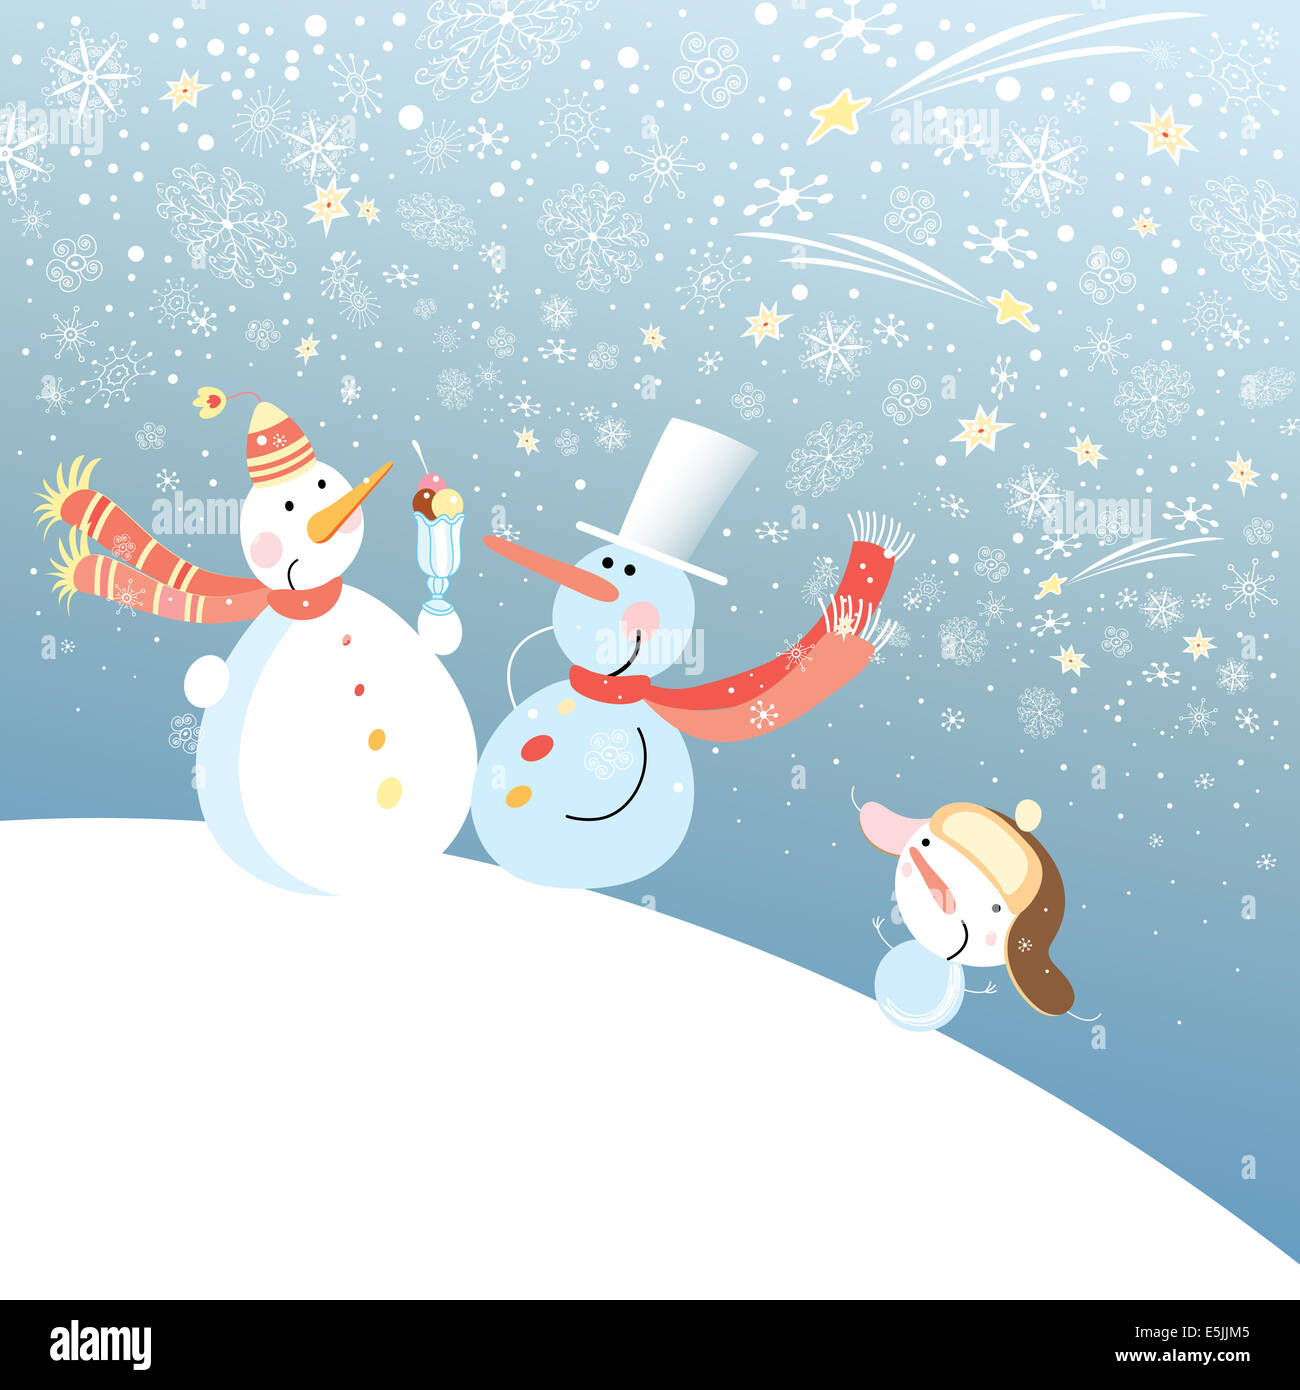 funny snowman on background with snowflakes Stock Photo